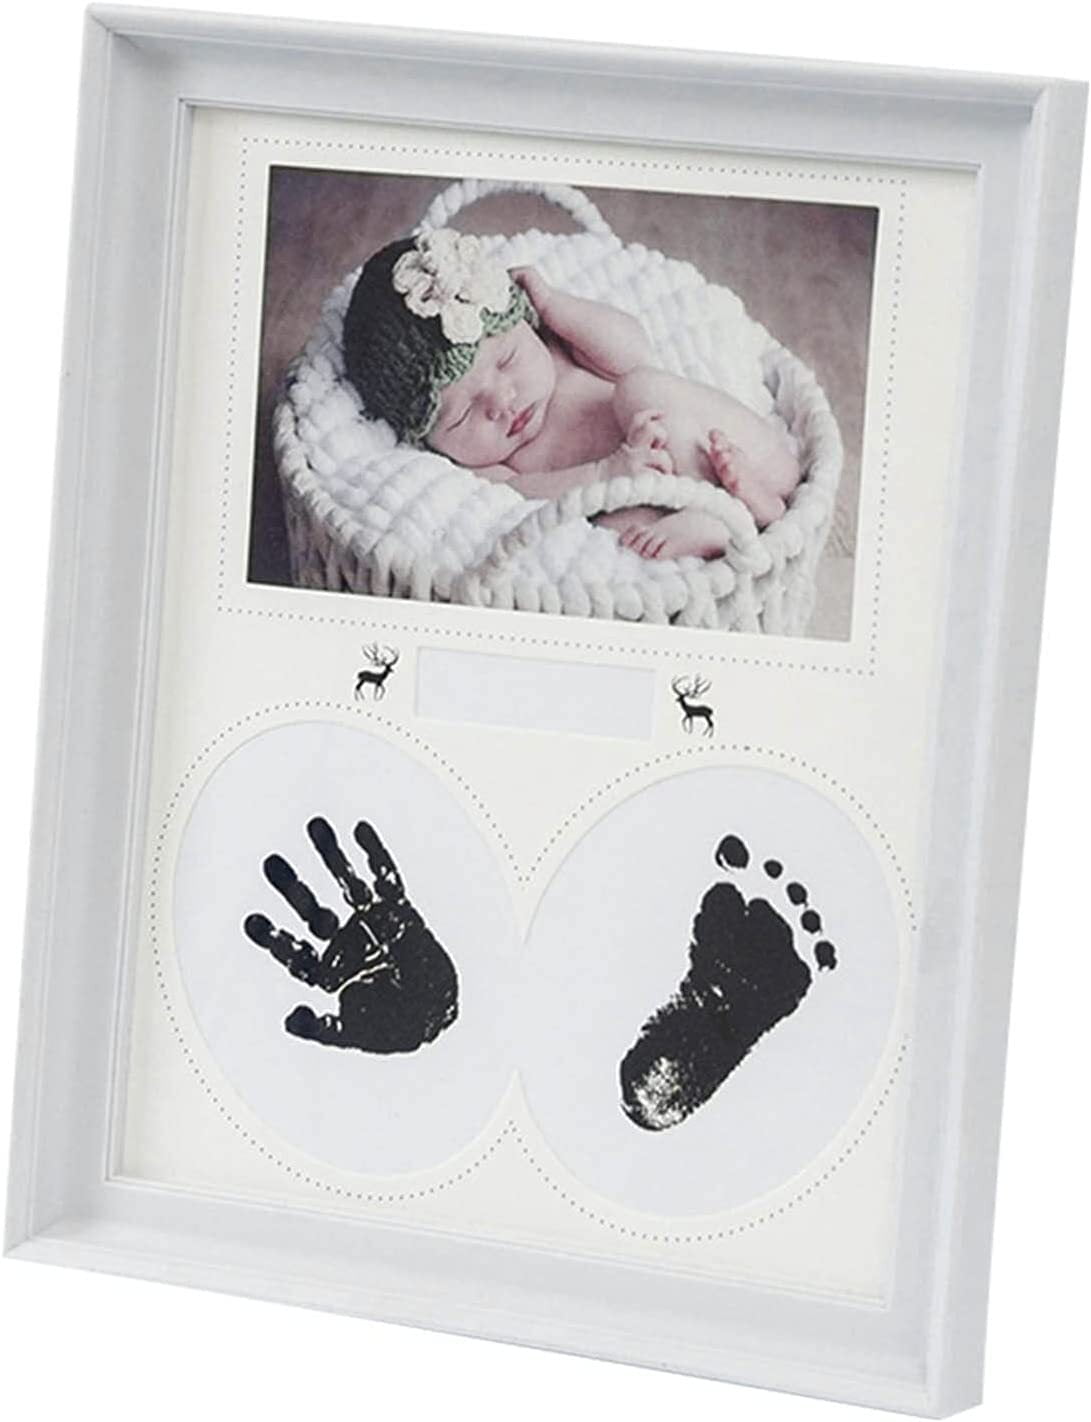 Baby Hand and Footprint Kit, Baby Girls Gift, Registry for Baby, Gender Reveal Gifts, Baby Footprint Kit, Gifts for New Mom, Newborn Gifts, Keepsake, White, 11x9.1x0.6 Inch -